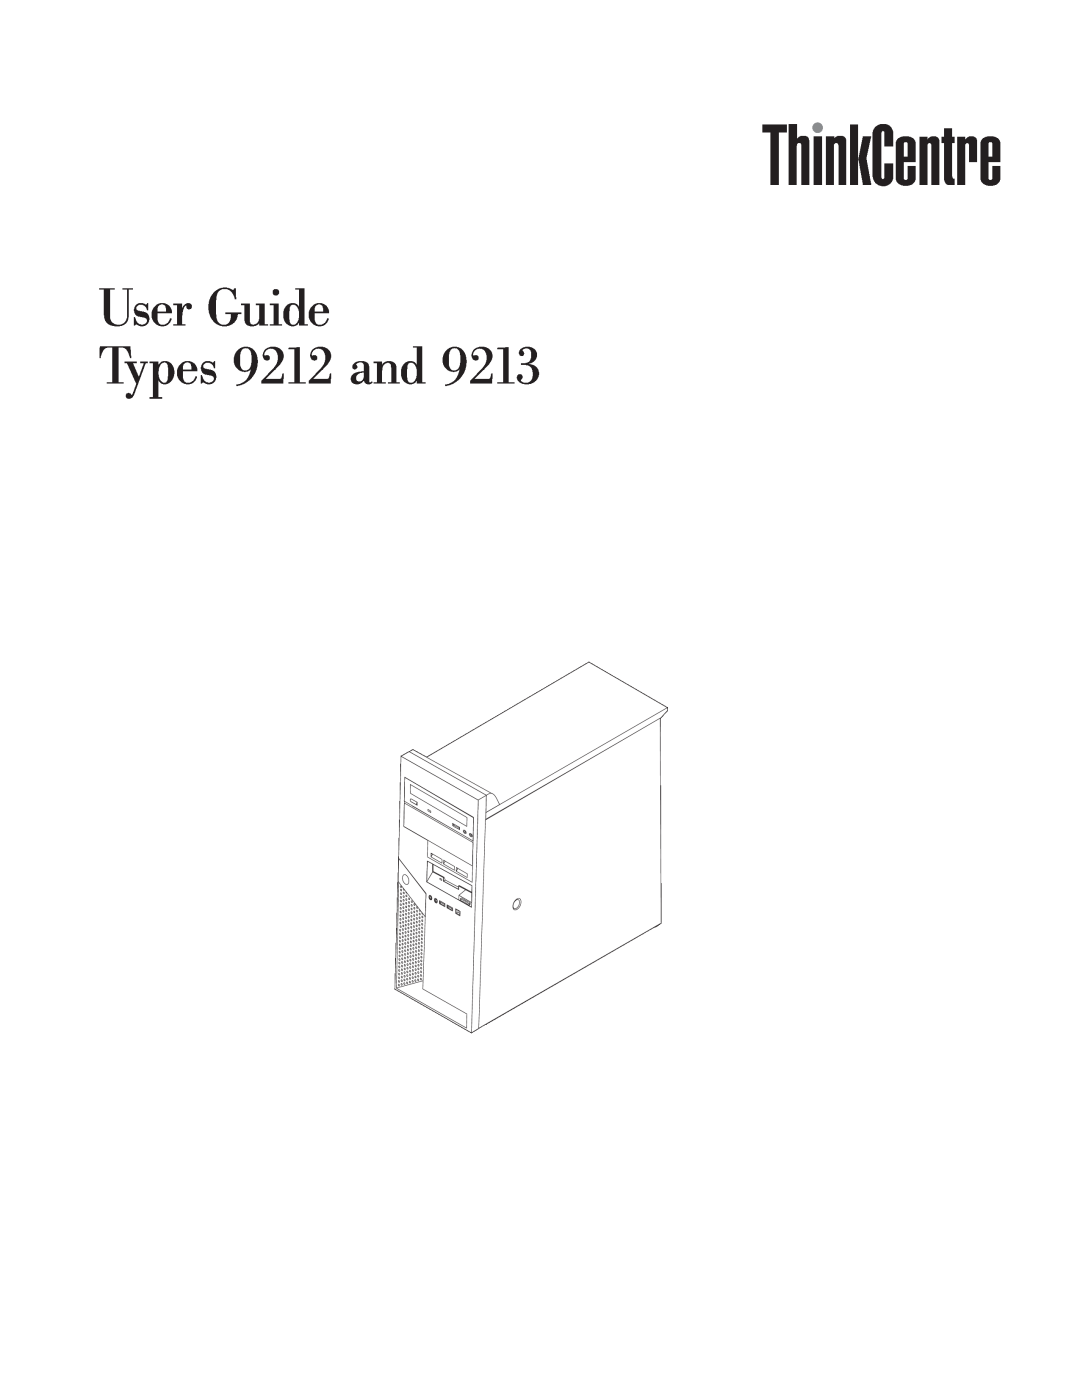 Lenovo 9213 manual User Guide Types 9212 and 